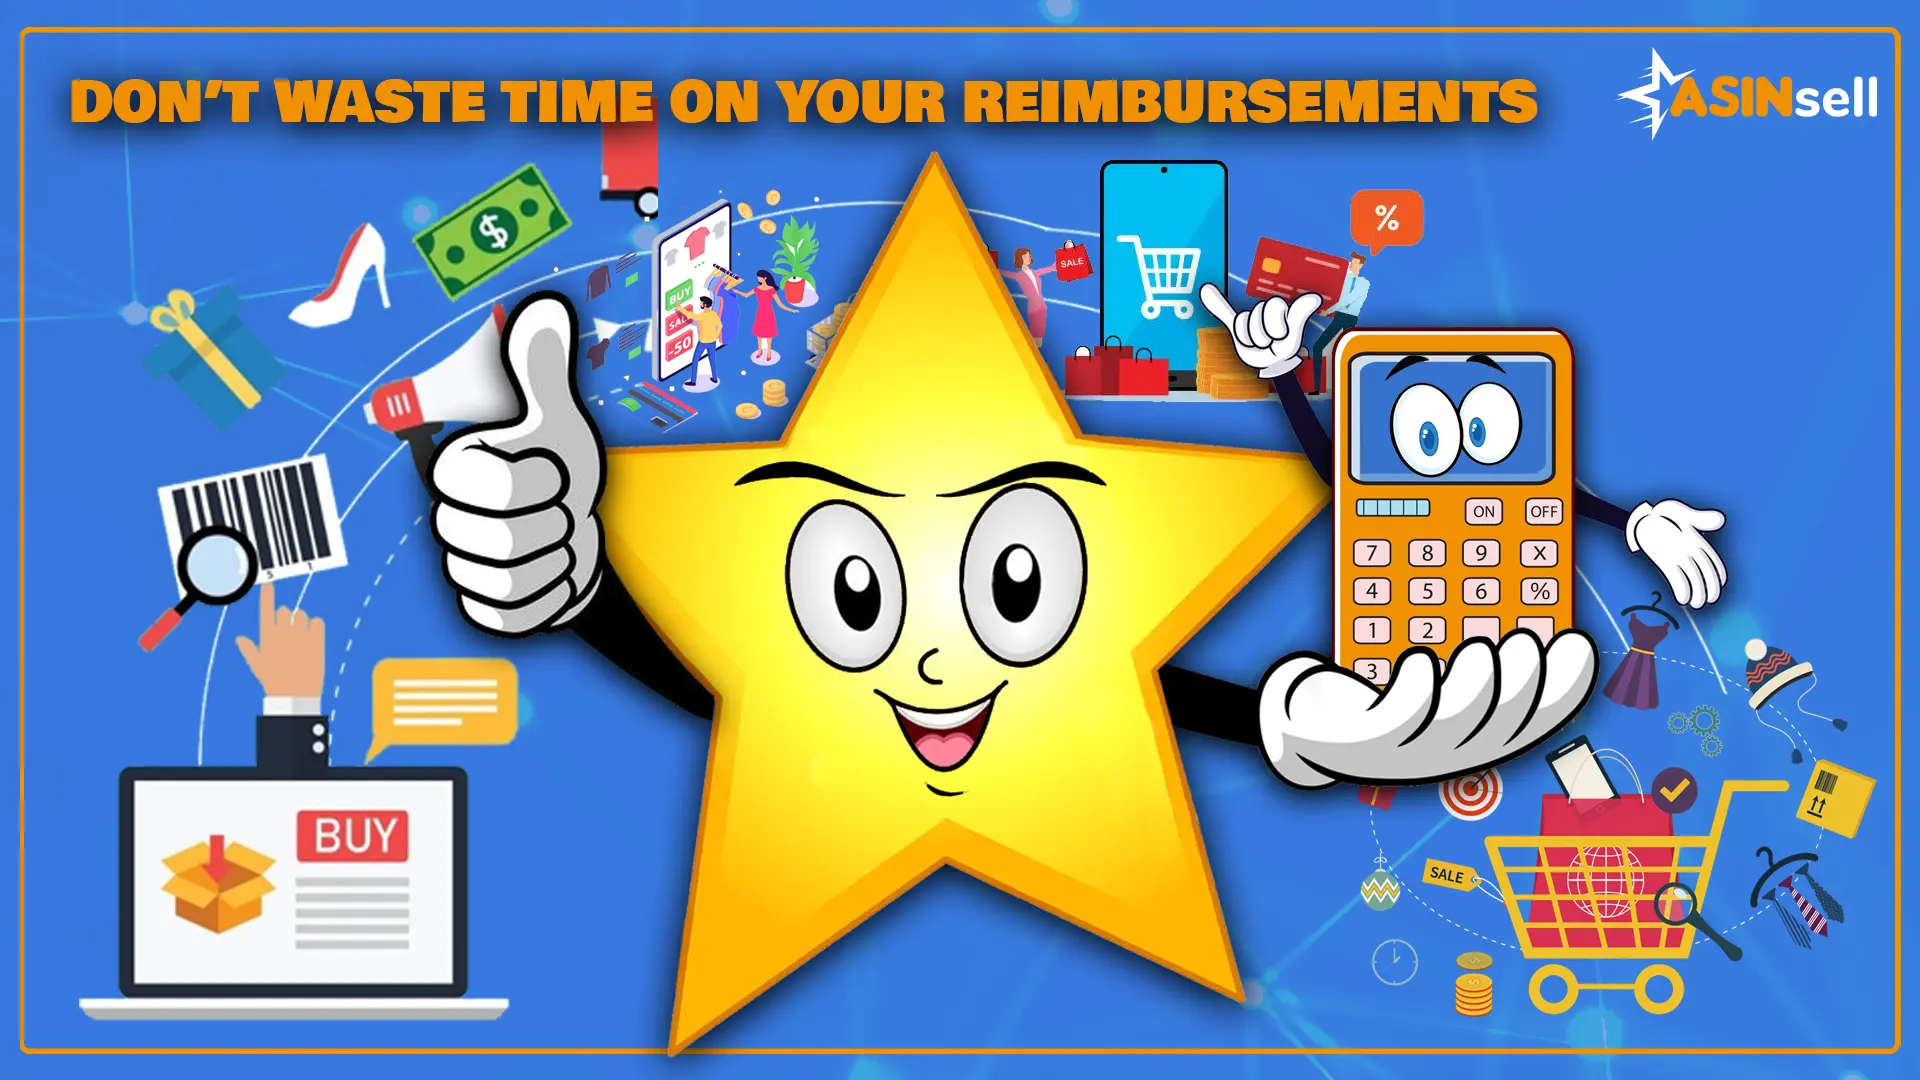 Don't Waste Time on Your Reimbursements